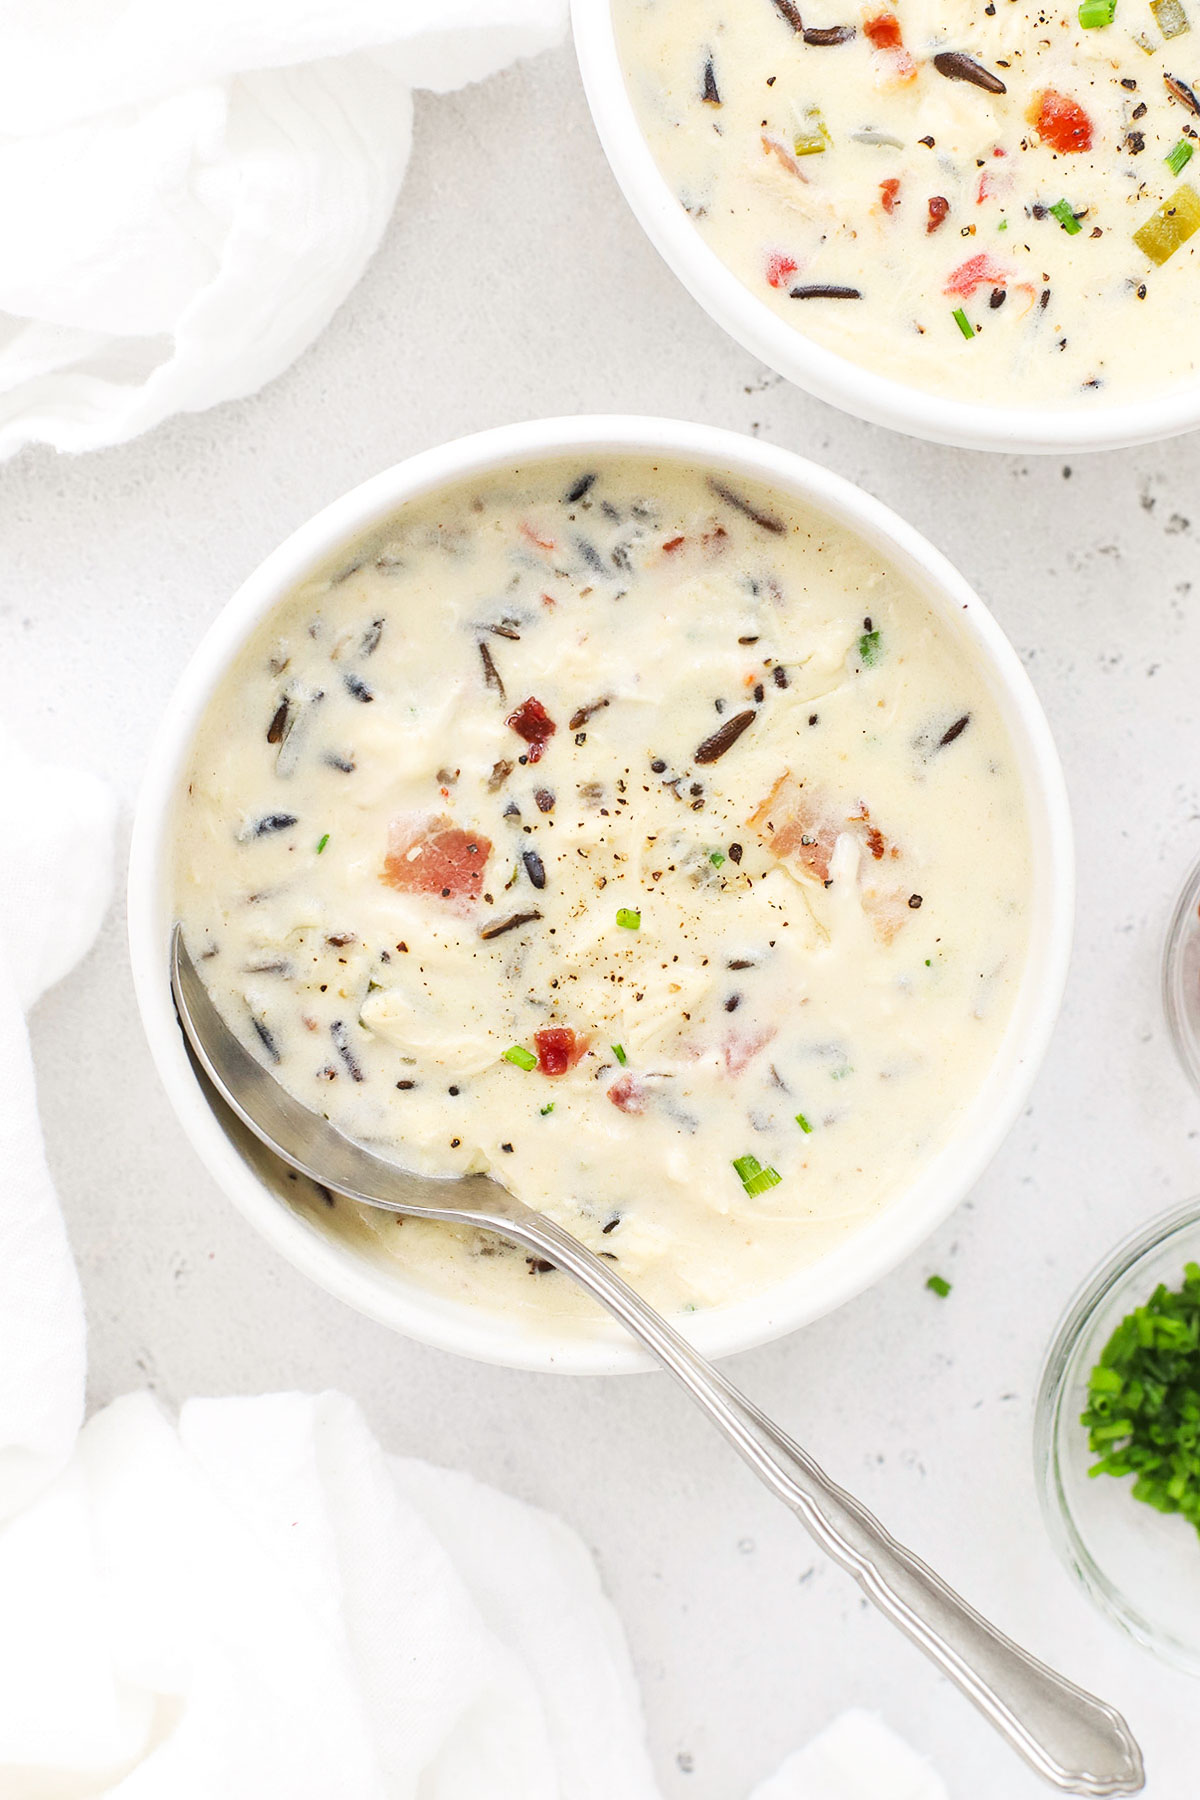 two bowls of gluten-free chicken wild rice soup with bacon